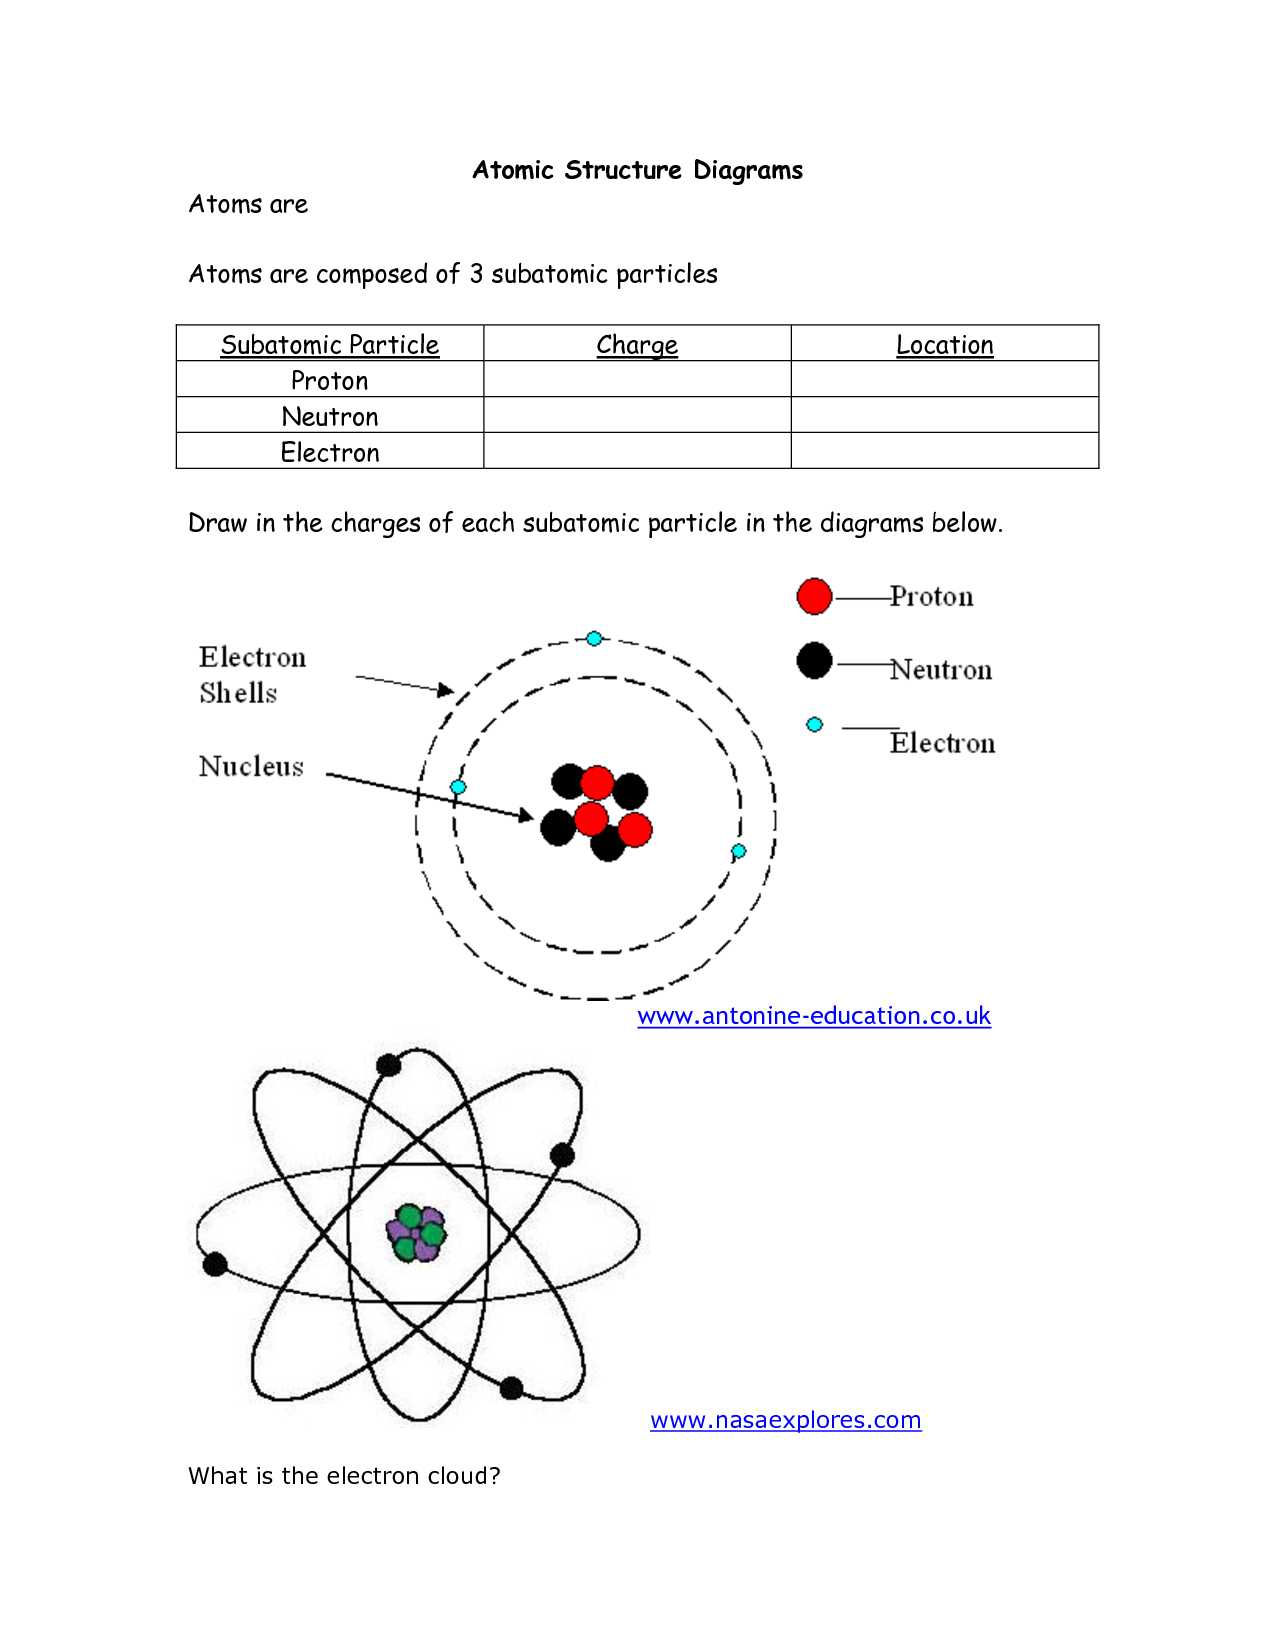 Solubility Curve Practice Problems Worksheet Along with atomic Structure Diagram Worksheet